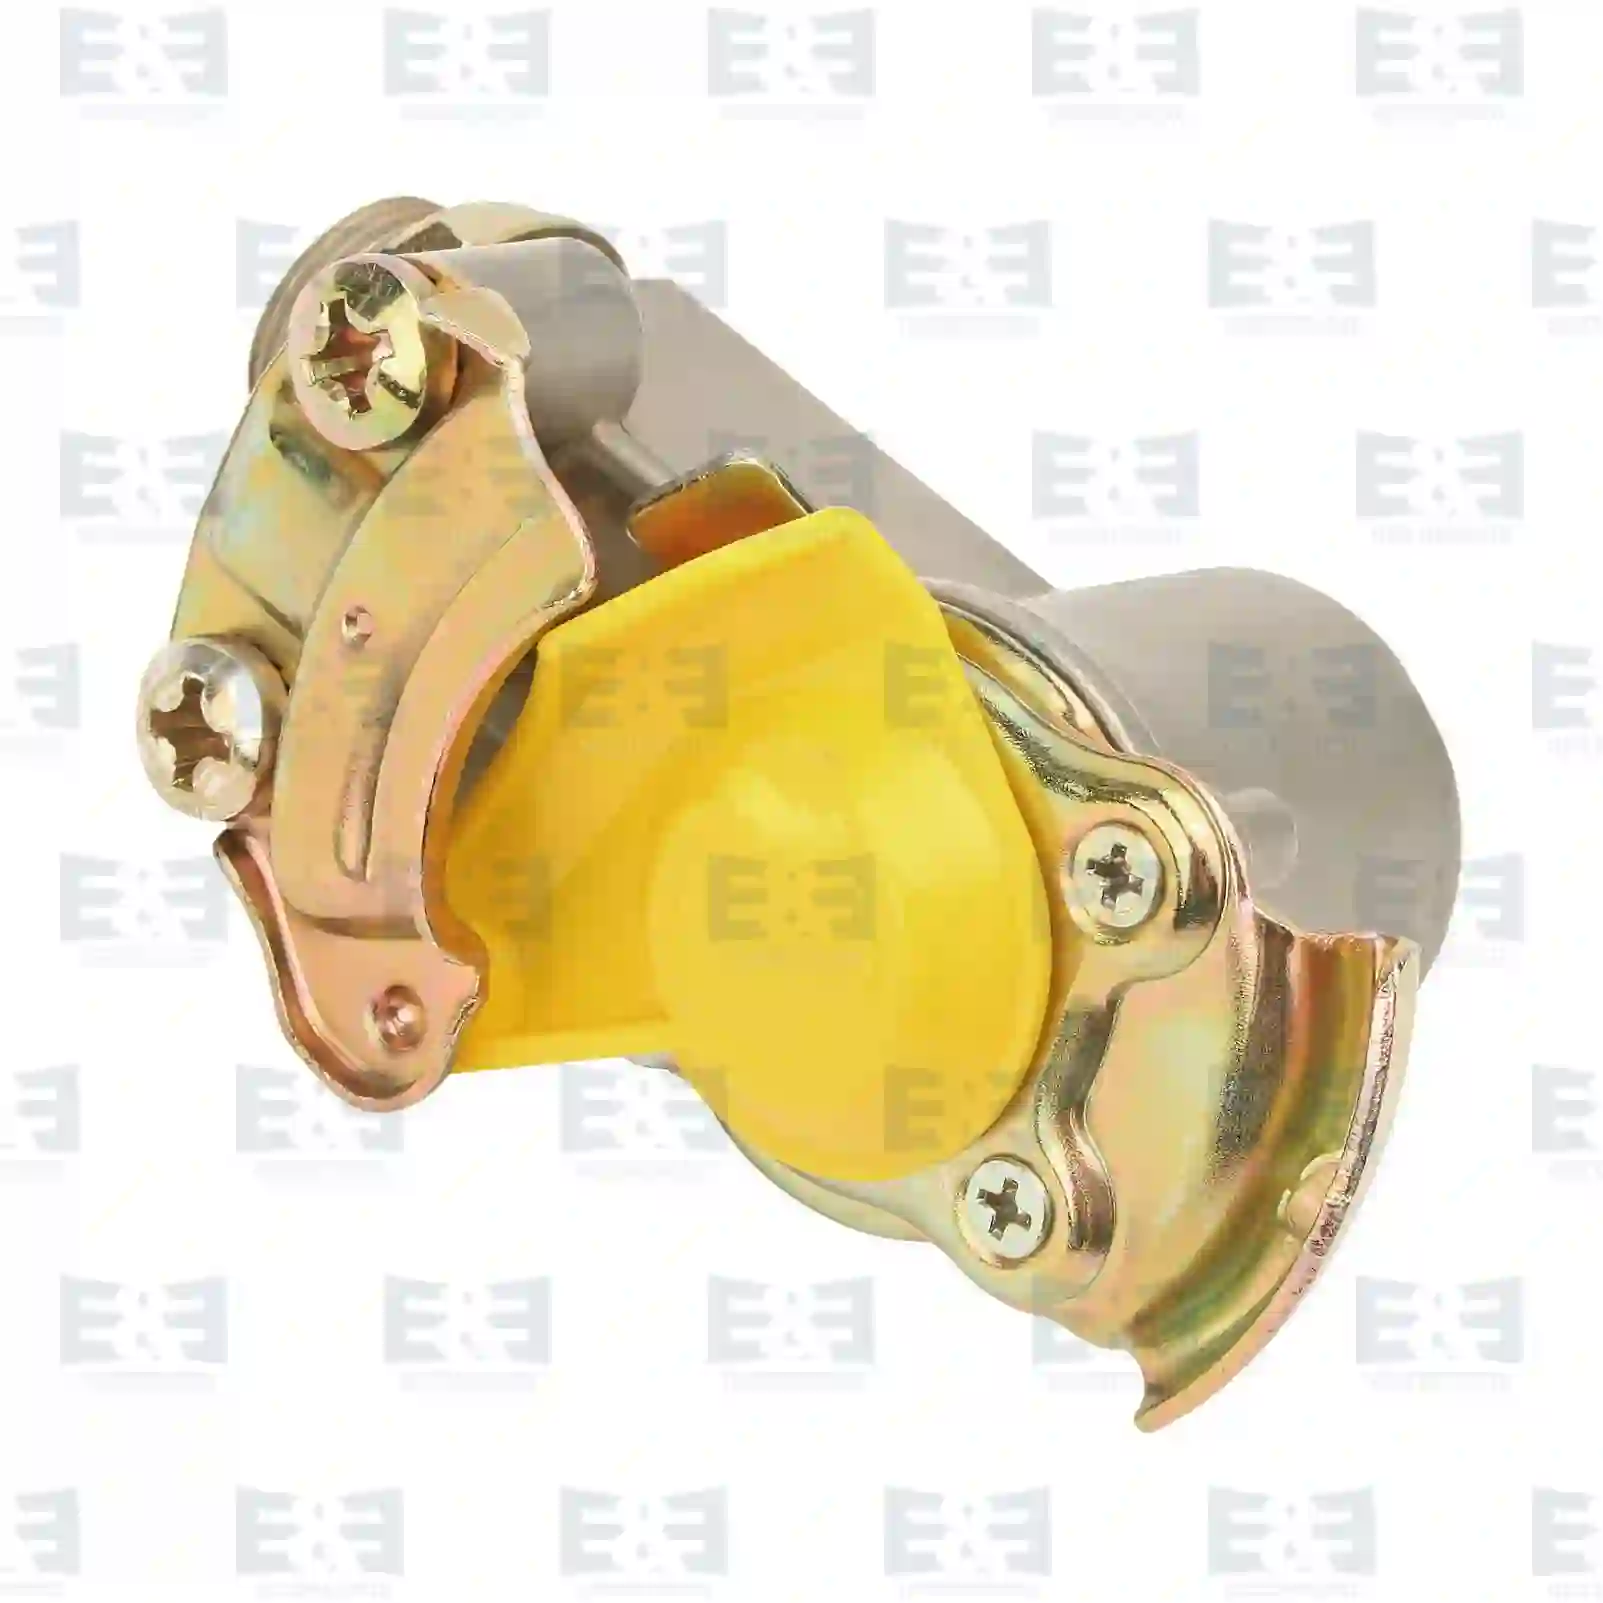 Compressed Air Palm coupling, yellow lid, with pipe filter, EE No 2E2285662 ,  oem no:1518206, 21151103103, 6500331, 5058203290, 5820329, 81998062077, AIF1174, 1912348, 1020771, 55106, WA9522010010 E&E Truck Spare Parts | Truck Spare Parts, Auotomotive Spare Parts